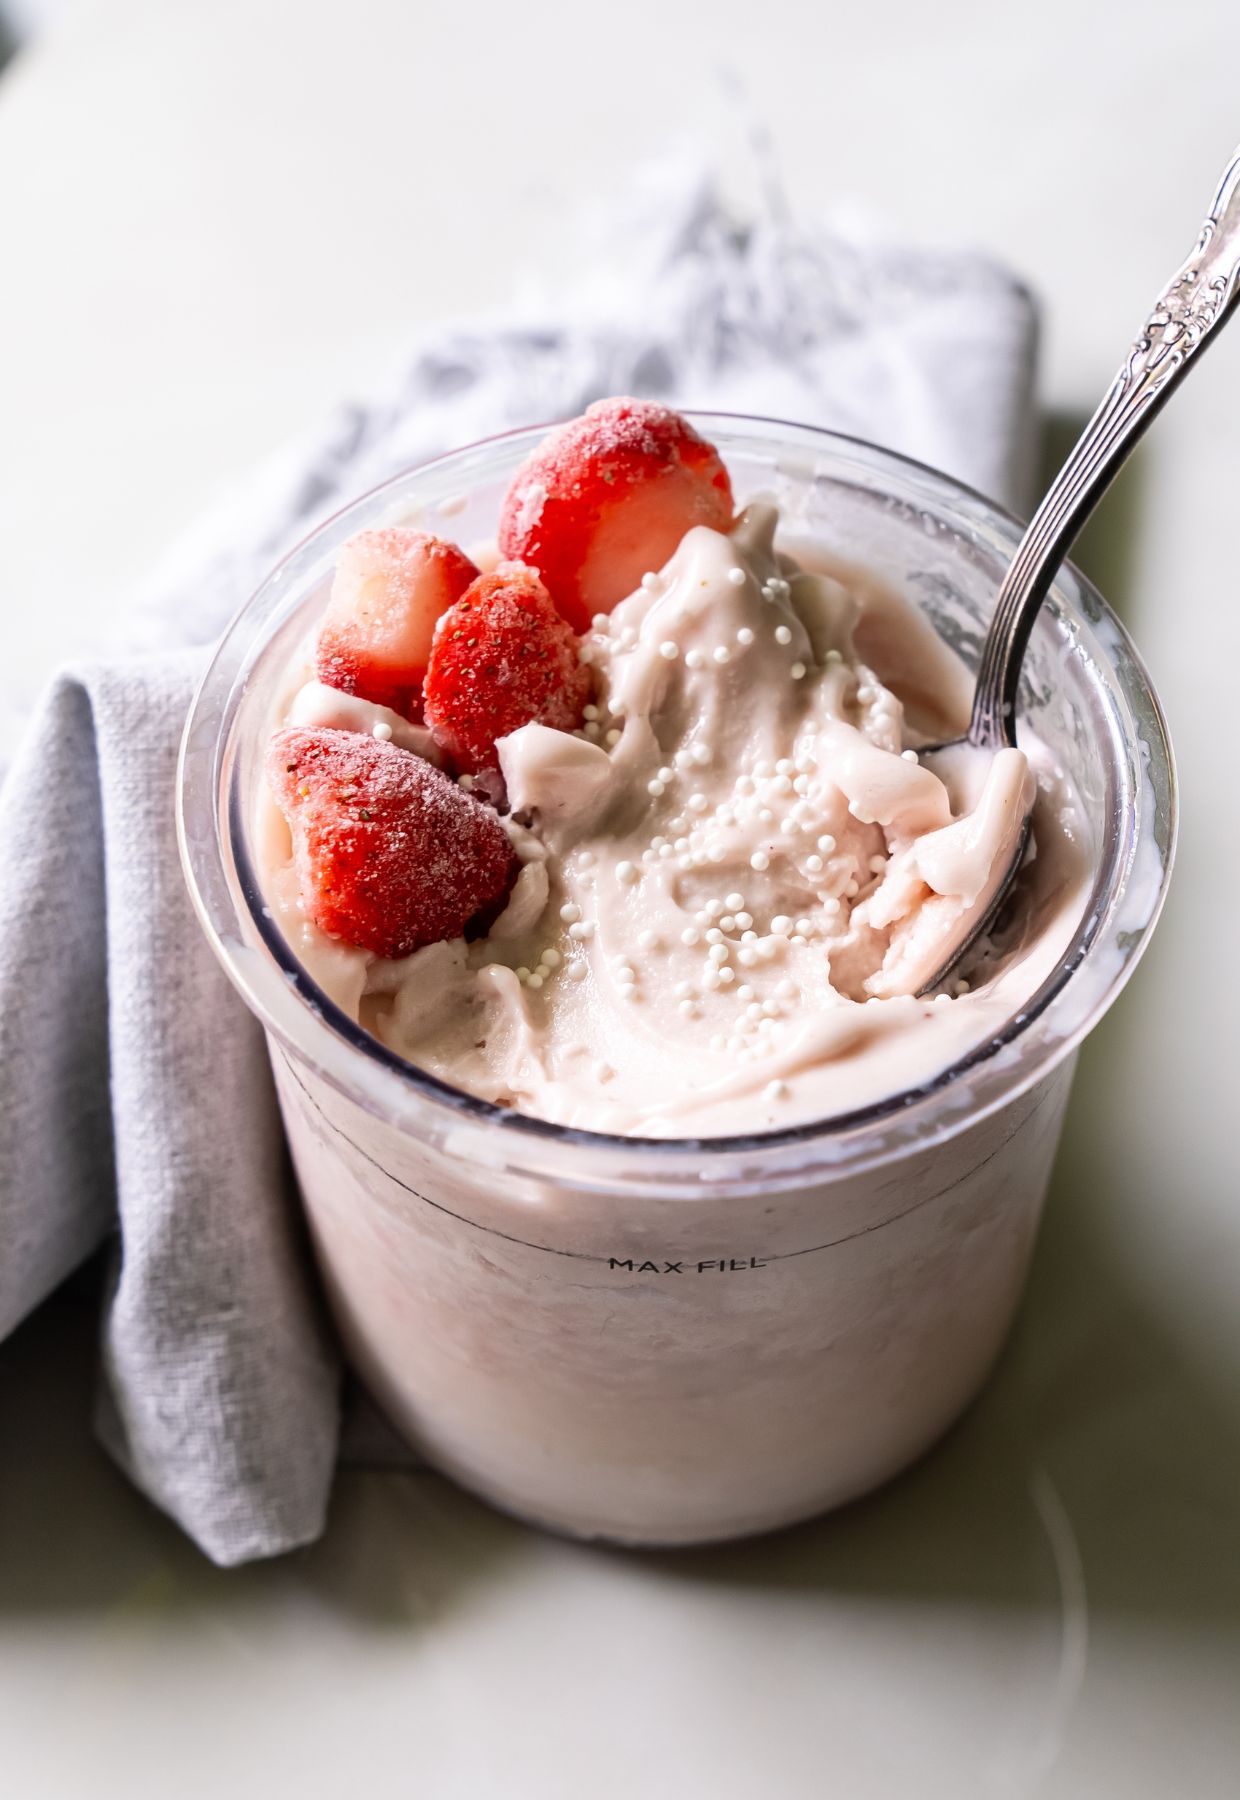 A glass jar filled with creamy yogurt topped with whole strawberries and white sprinkles, with a metal spoon inside, placed on a light surface with a gray cloth napkin beside it.